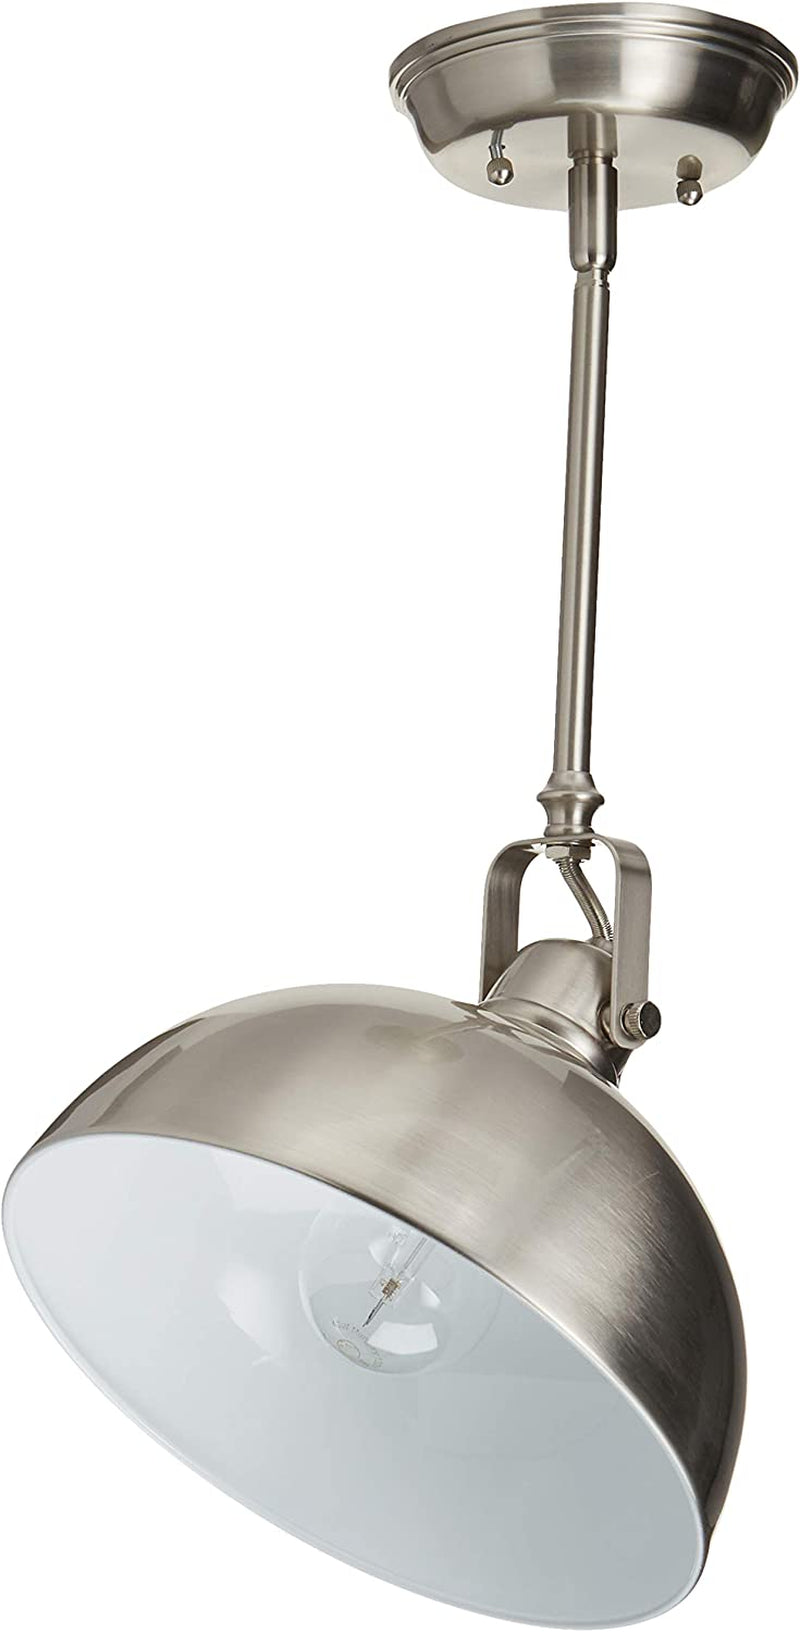 CANARM IPL222B01BN Polo 1 Light 9" Rod Pendant, Brushed Nickel with Painted White Interior, Silver Home & Garden > Lighting > Lighting Fixtures Canarm Ltd.   